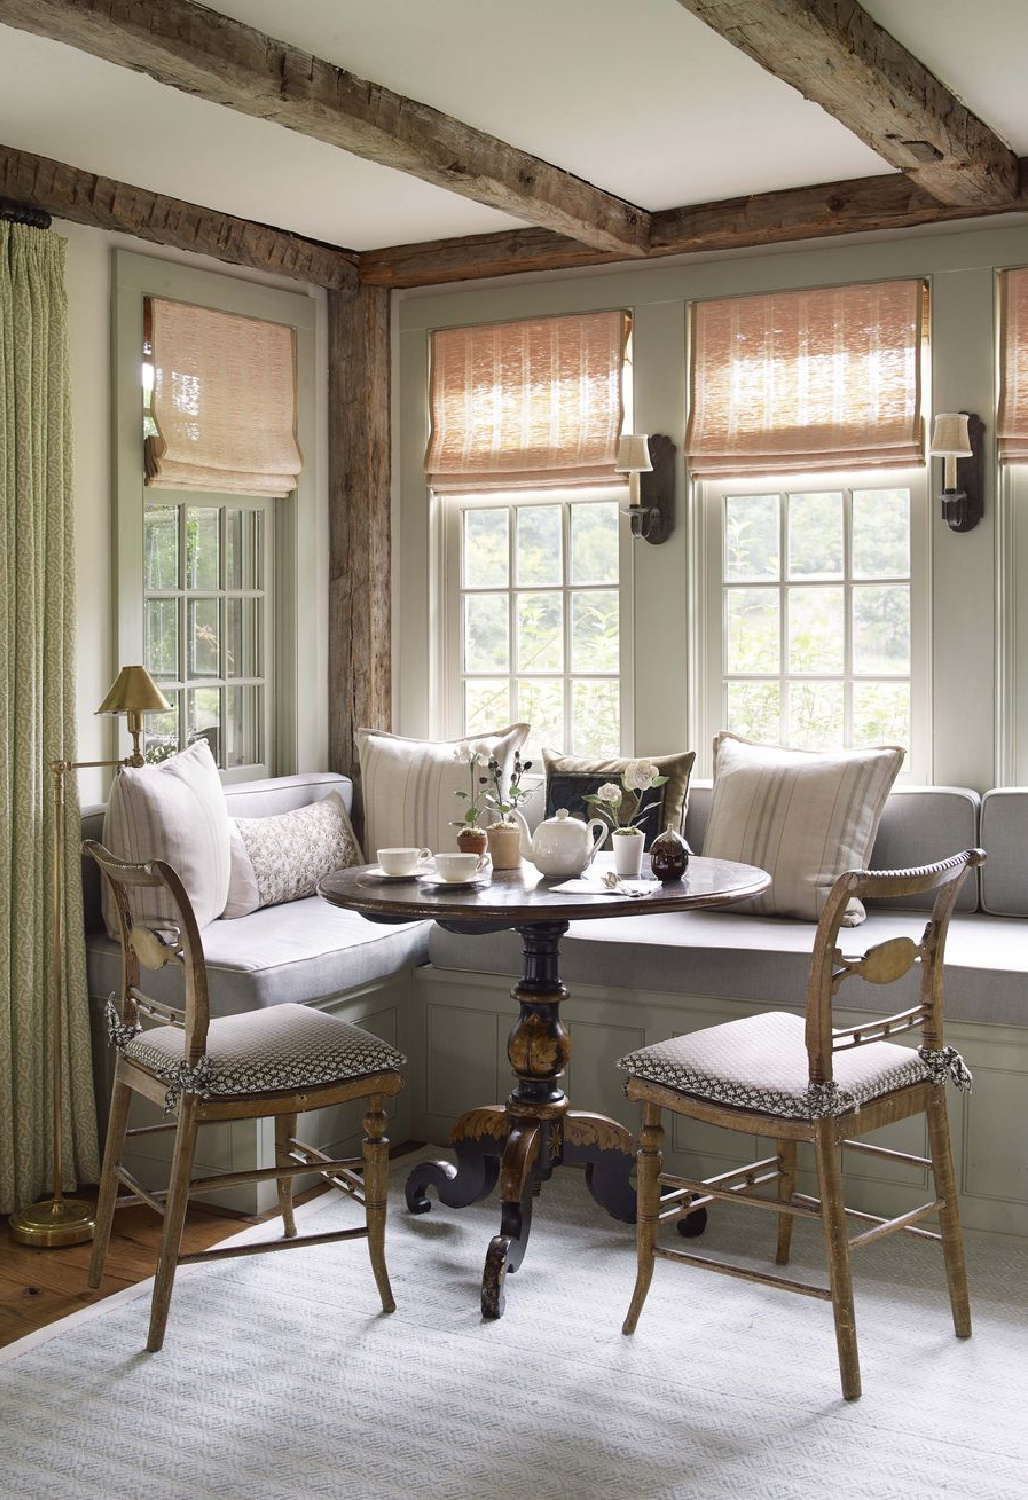 Cathy Kincaid designed breakfast nook with banquette (photo: Tria Giovan) in a Connecticut cottage.